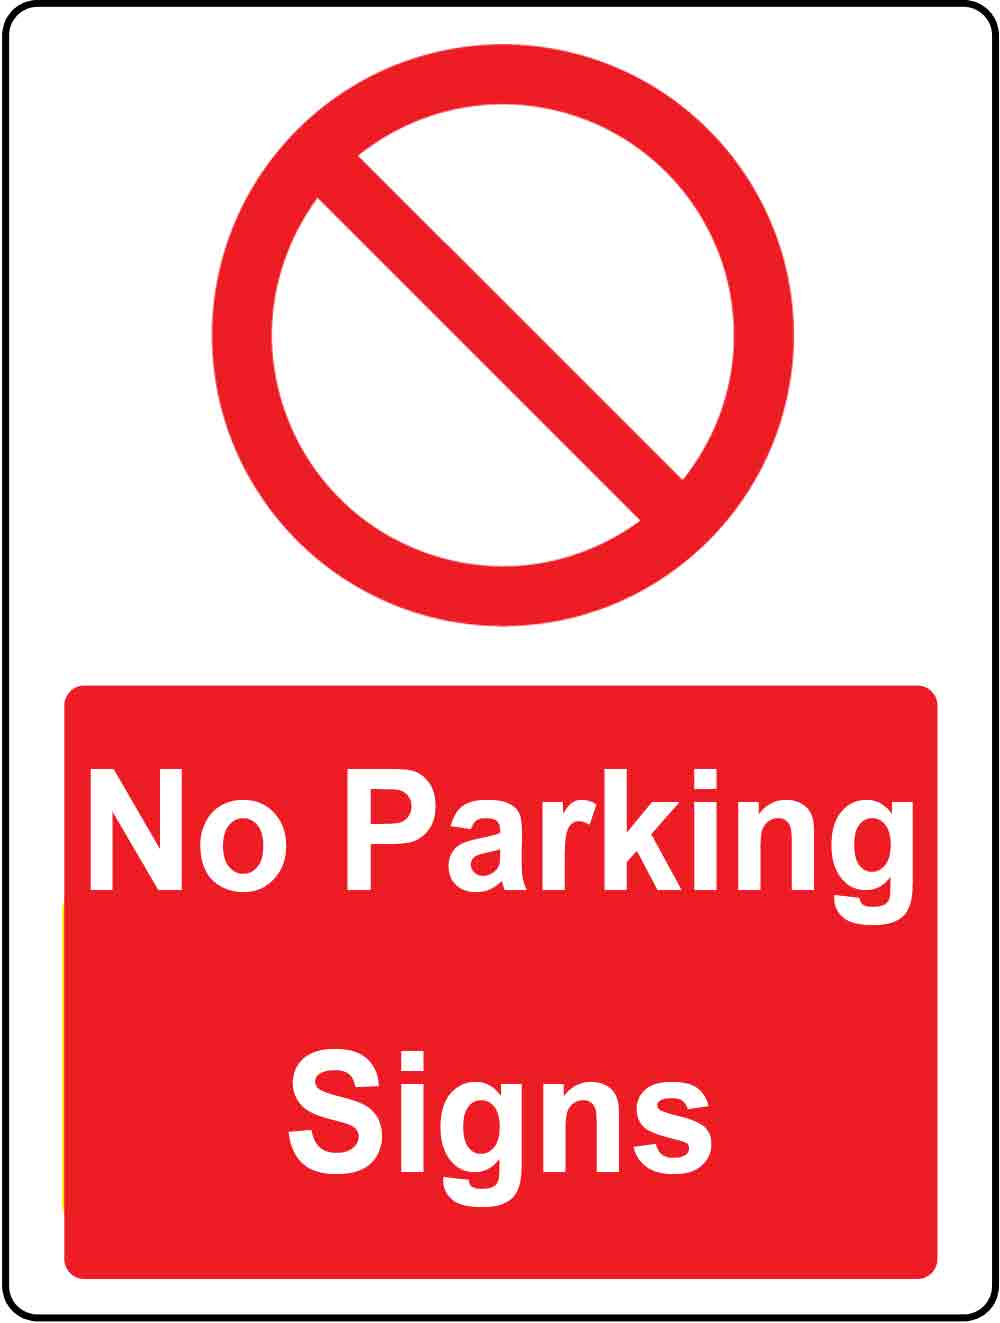 Traffic Signs Parking Stop Road Safety